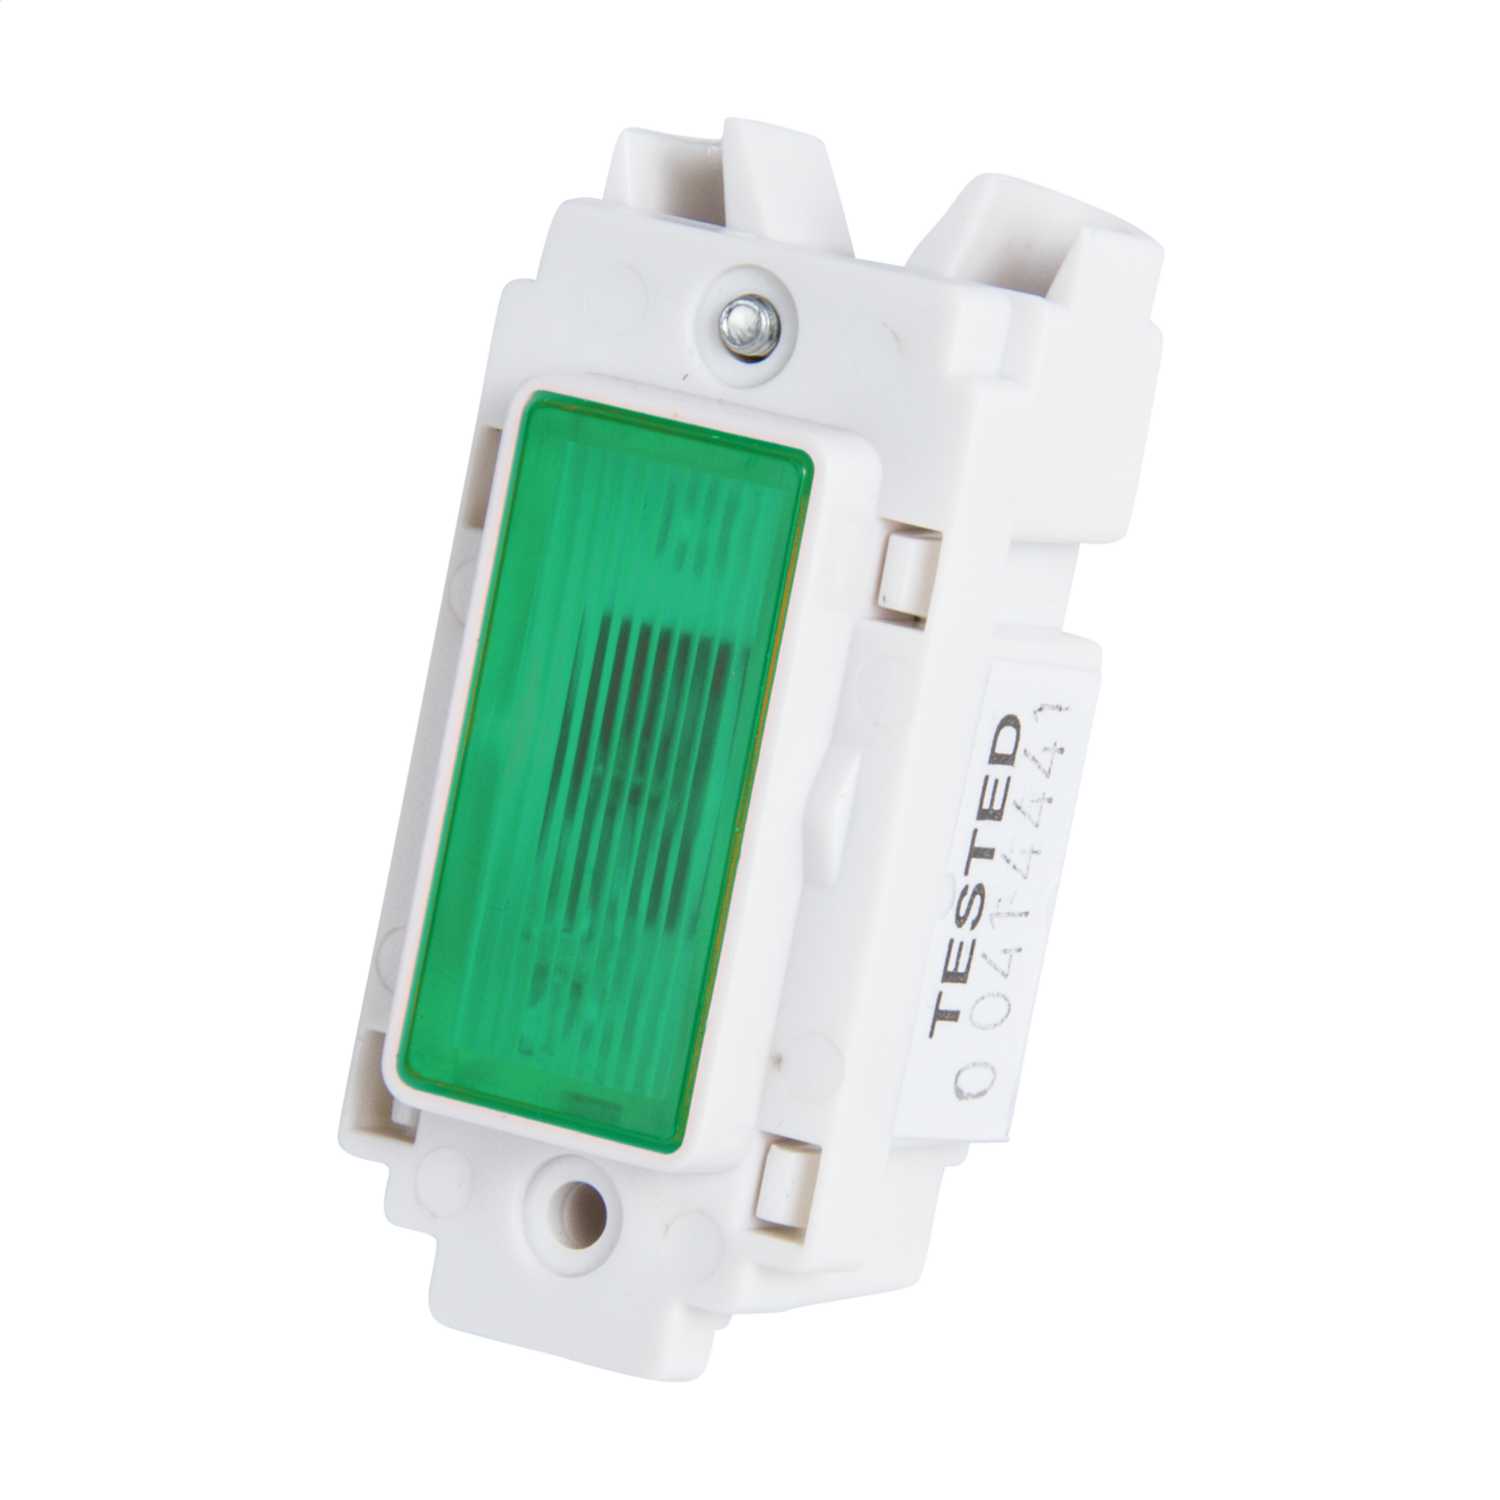 Crabtree Green Neon Indicator for Grid System (4493) | CEF